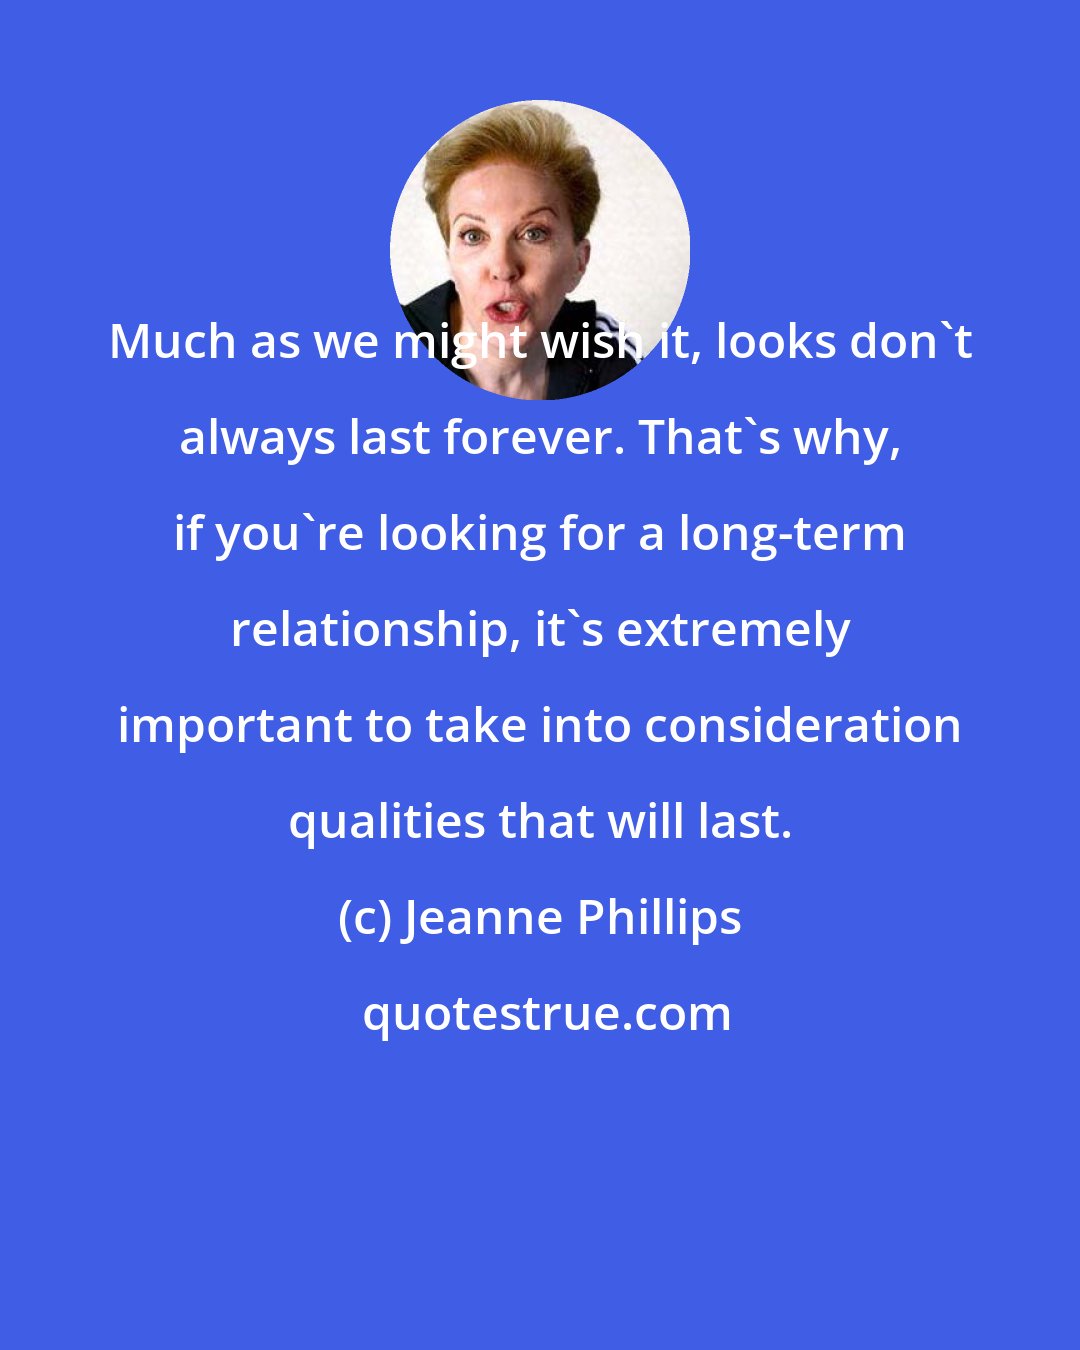 Jeanne Phillips: Much as we might wish it, looks don't always last forever. That's why, if you're looking for a long-term relationship, it's extremely important to take into consideration qualities that will last.